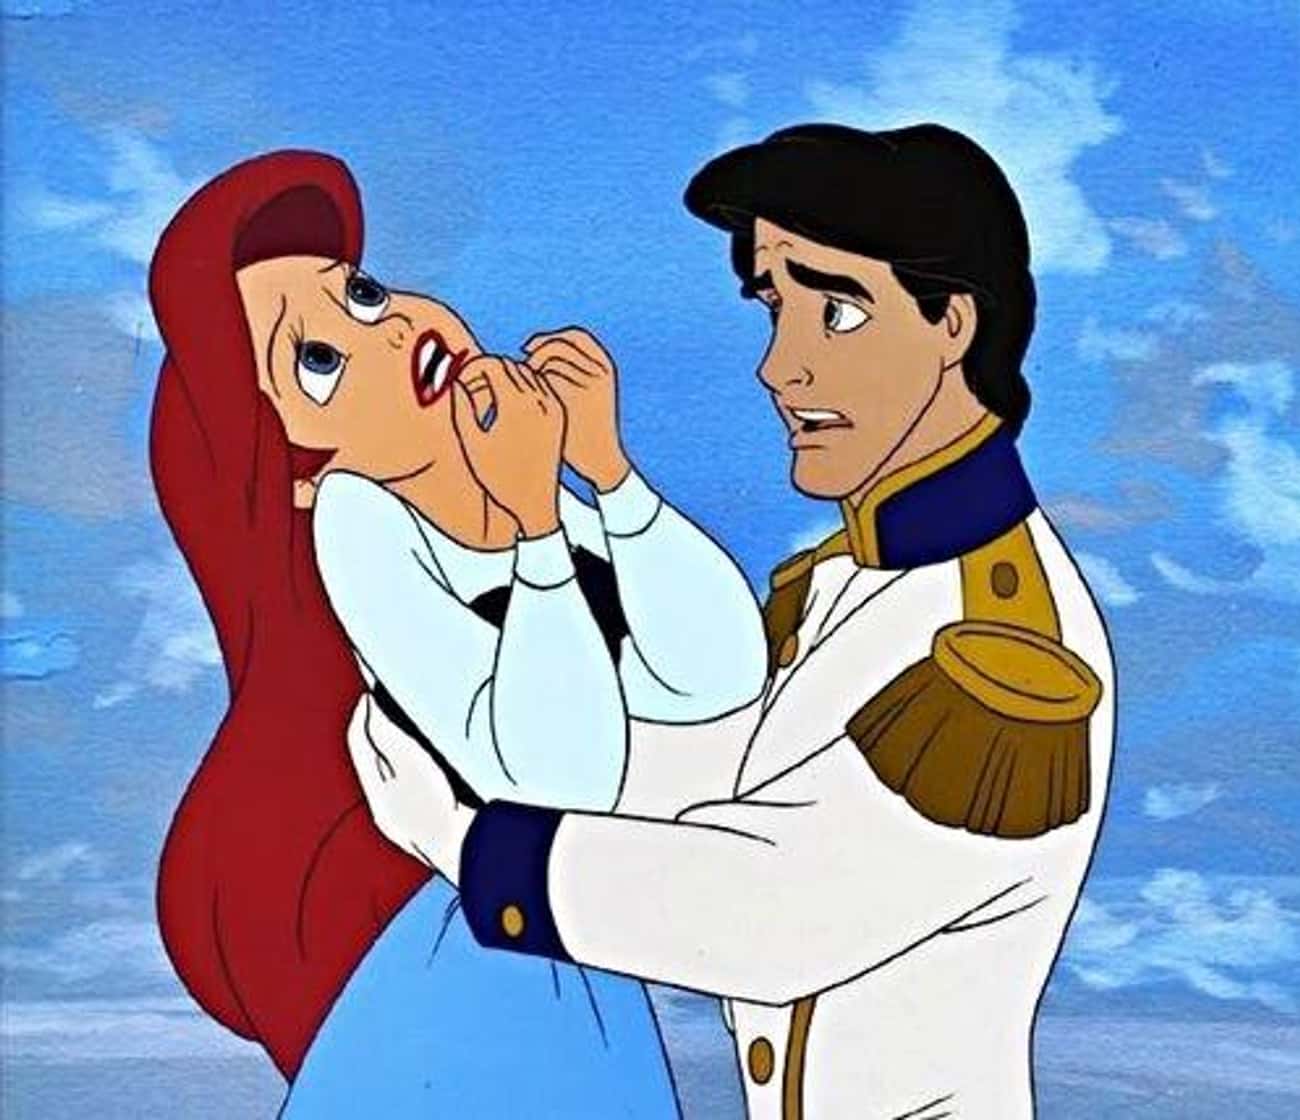 &#39;The Little Mermaid&#39; Depicts Love As Based Entirely On Looks